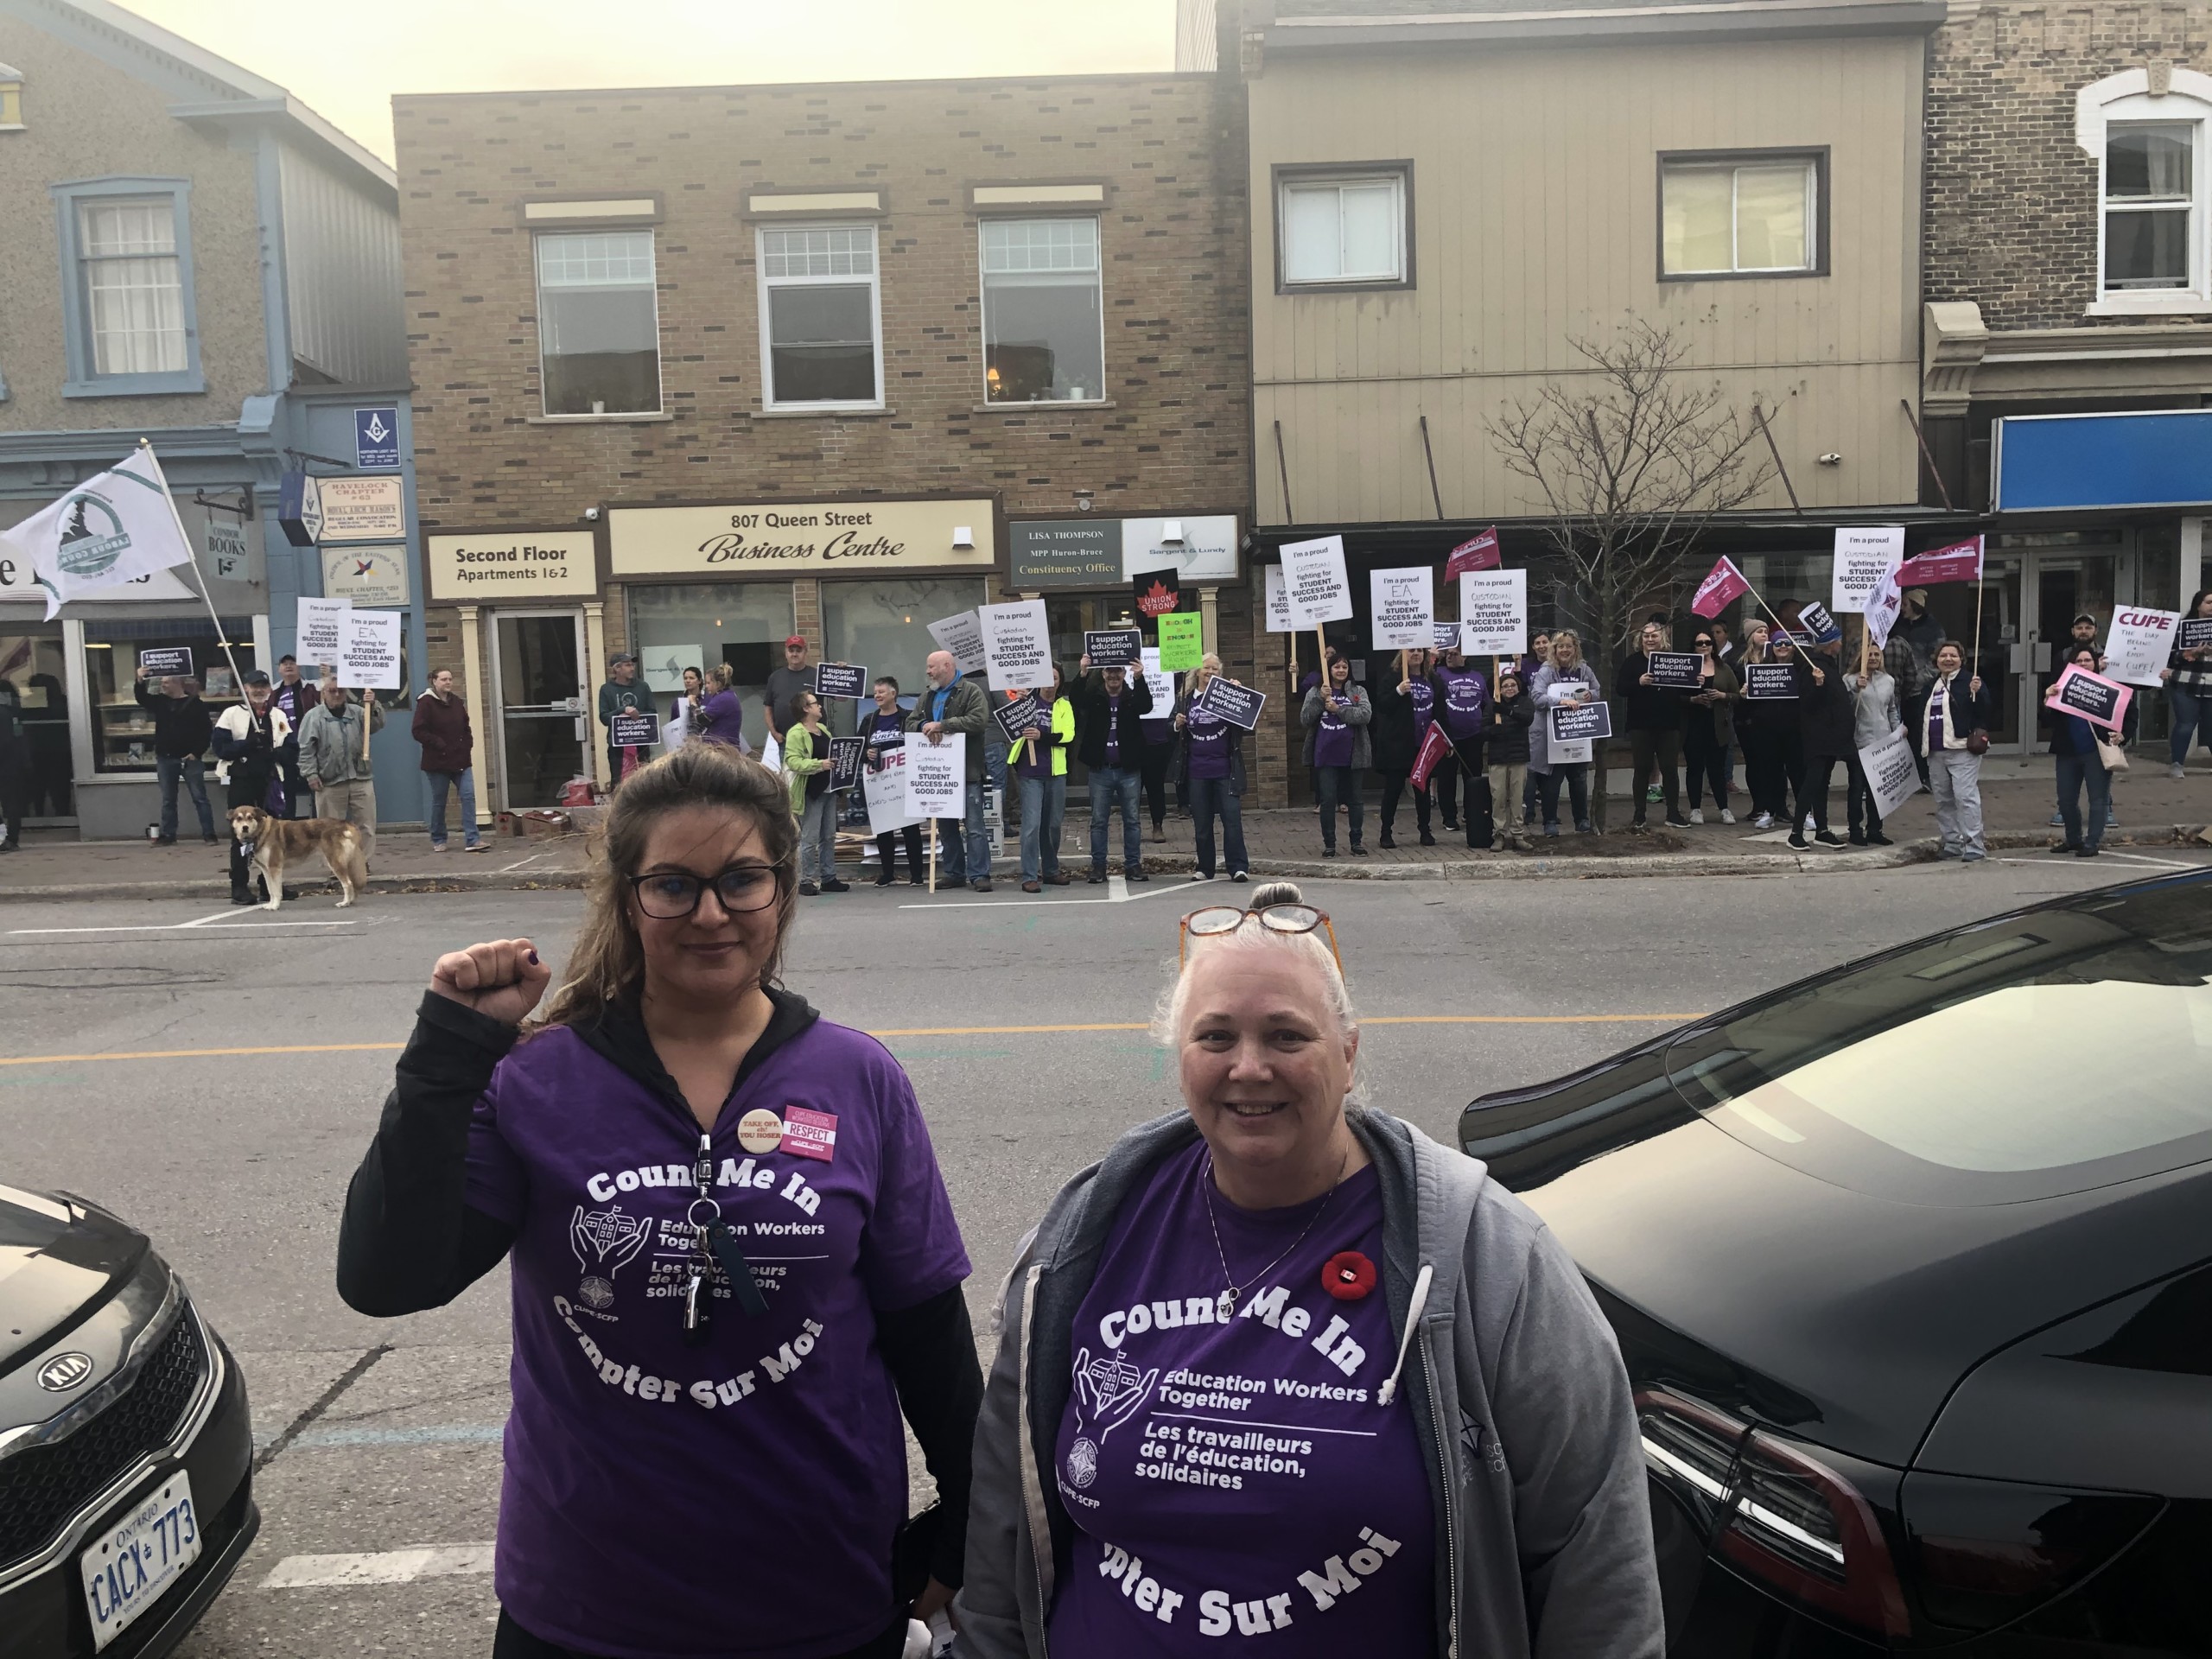 CUPE members protest in front of local MPP’s office